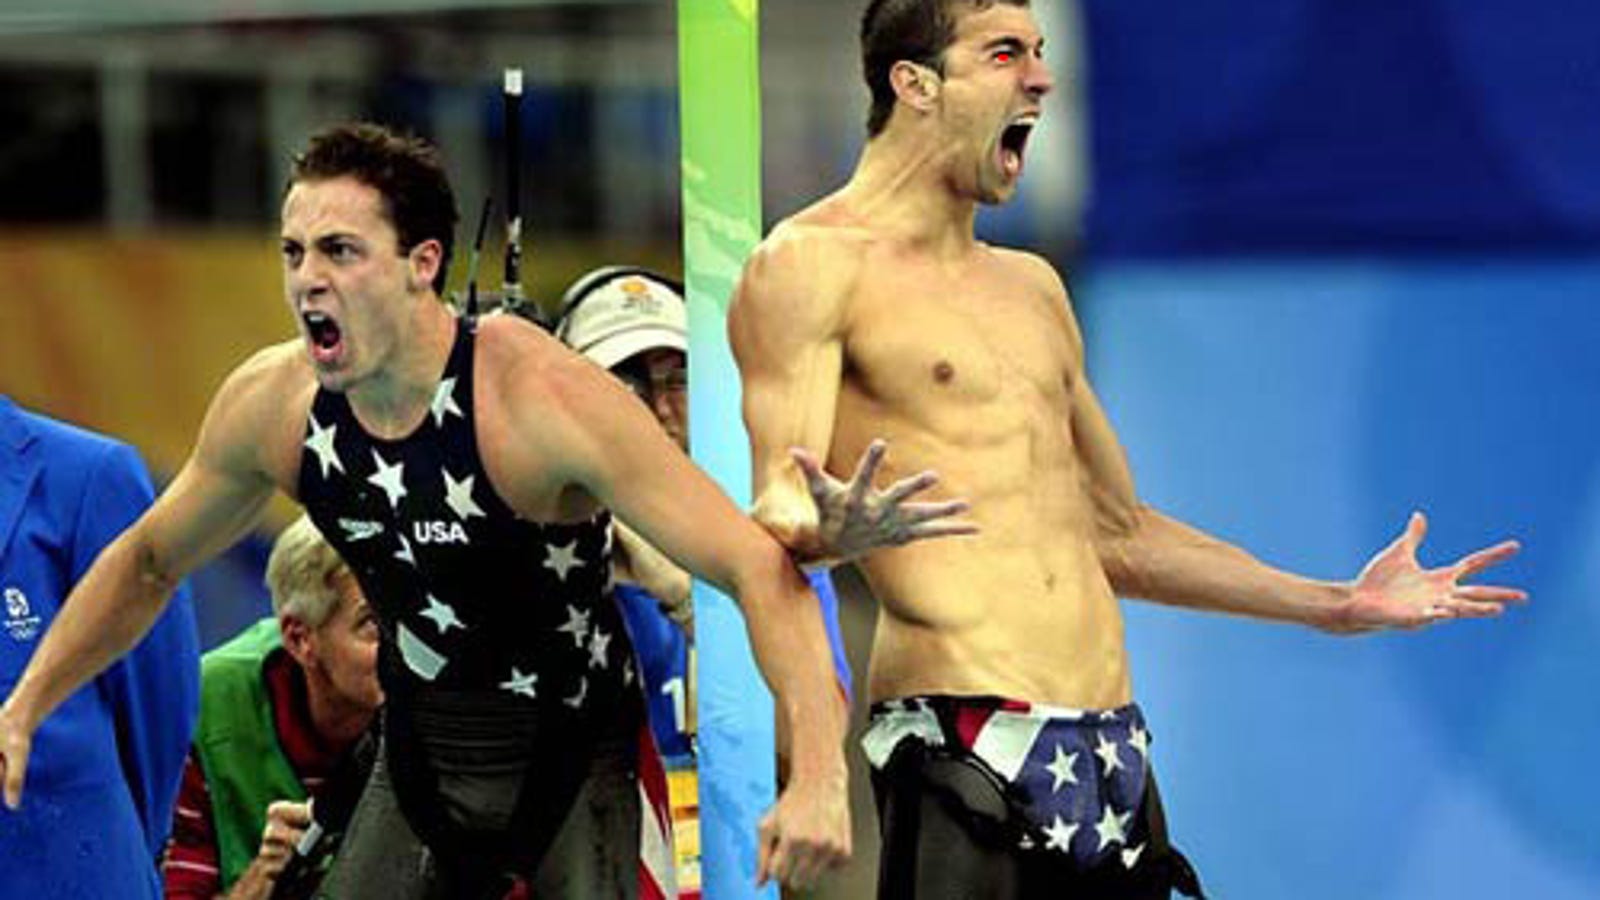 How to Watch Michael Phelps Snag 8th Gold Medal, Obliterate World